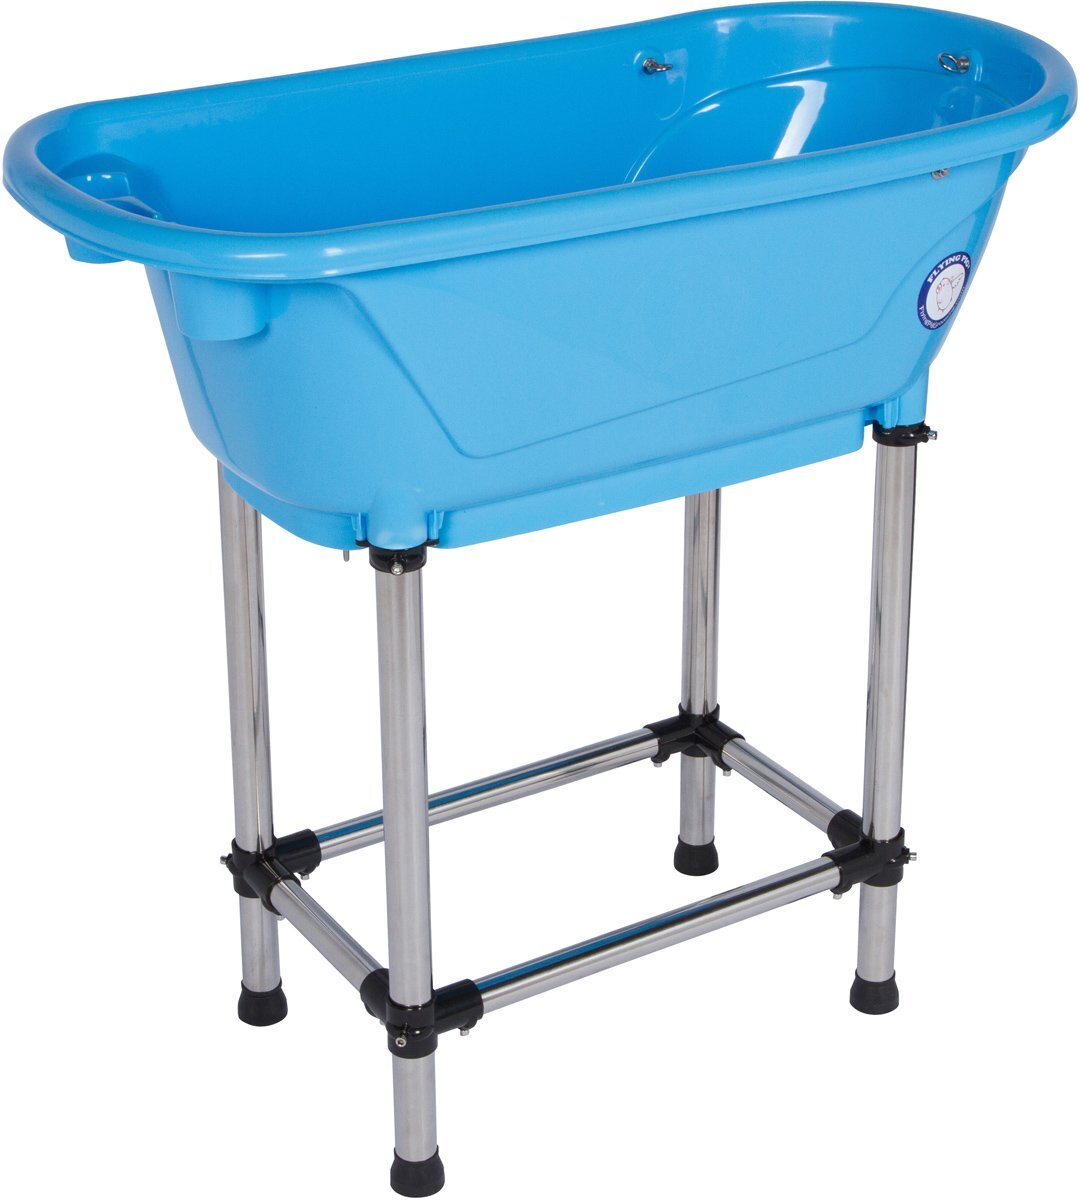 Small Portable Bath Tub For Dogs and Cats (Blue) - Chun Zhou